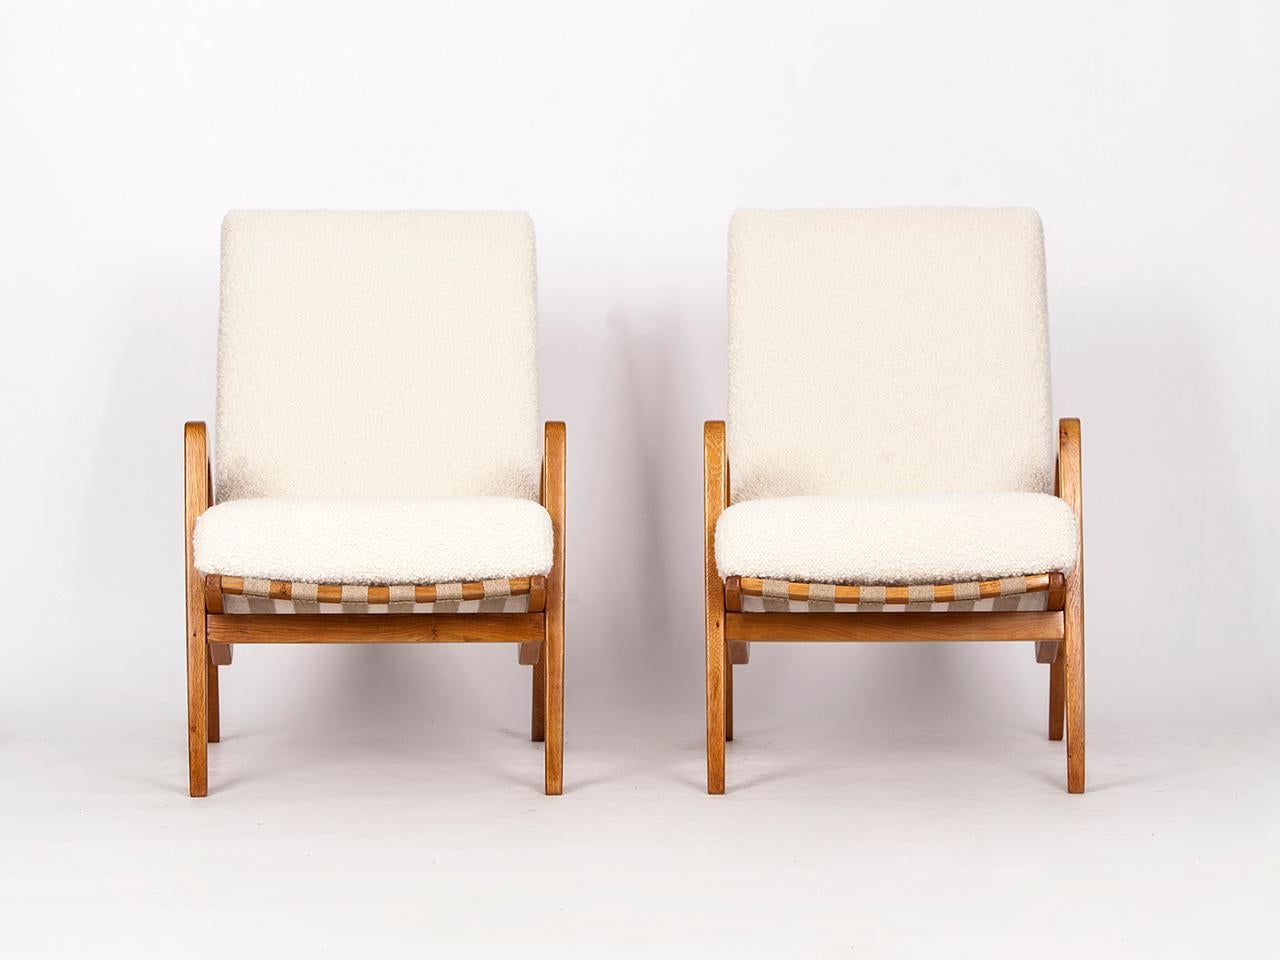 Pair of rare armchairs by Jan Vanek from the 1960s, manufactured in former Czechoslovakia. Newly varnished wooden parts, solid coconut fiber upholstery that complements the hemp straps. Fully restored. With a wonderfully soft english cover boucle